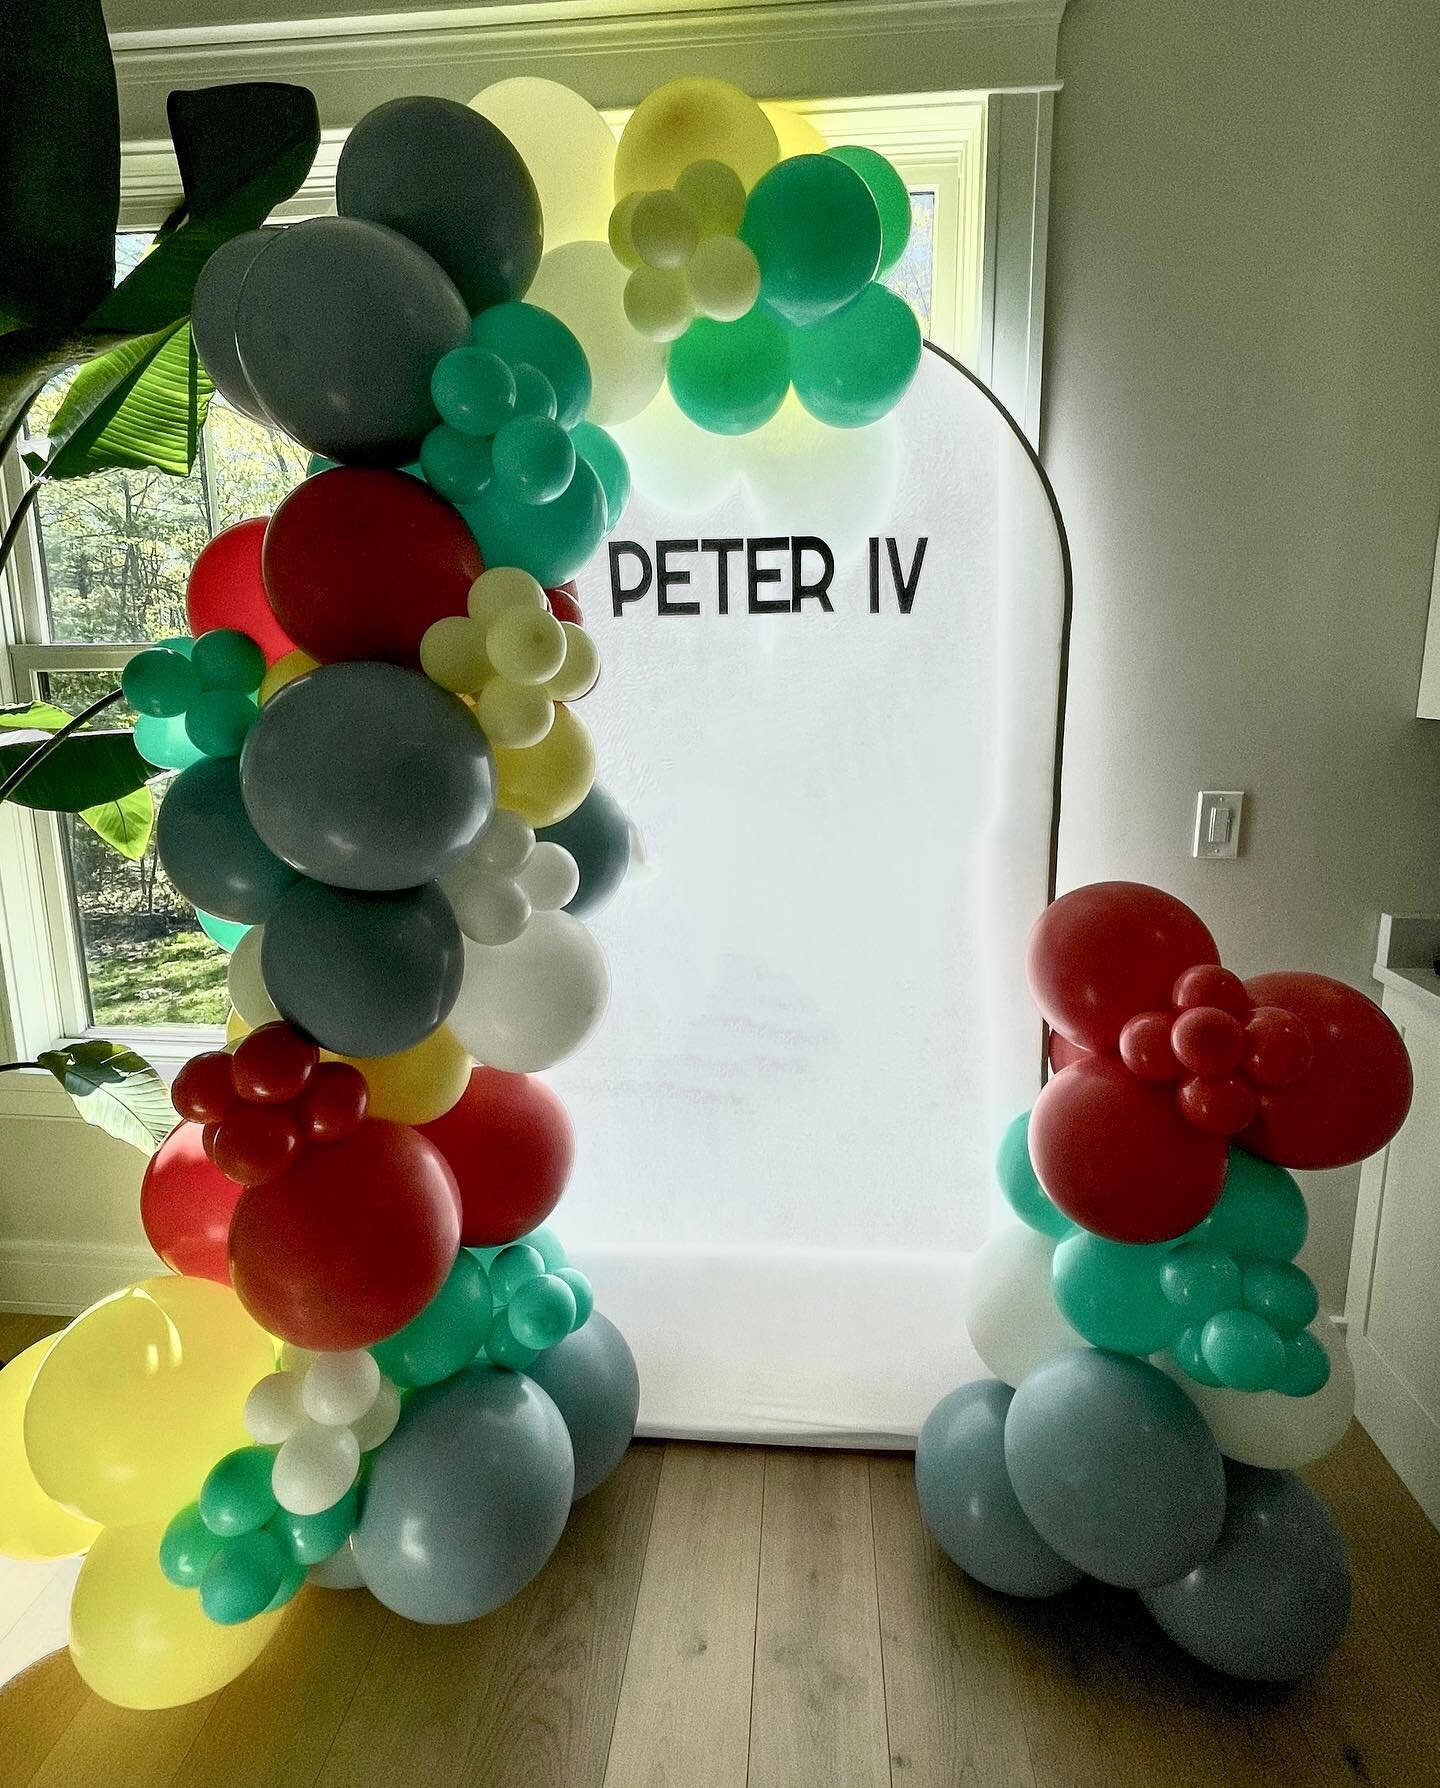 Happy first birthday to Peter! 🎉 All the fun colors for this one!